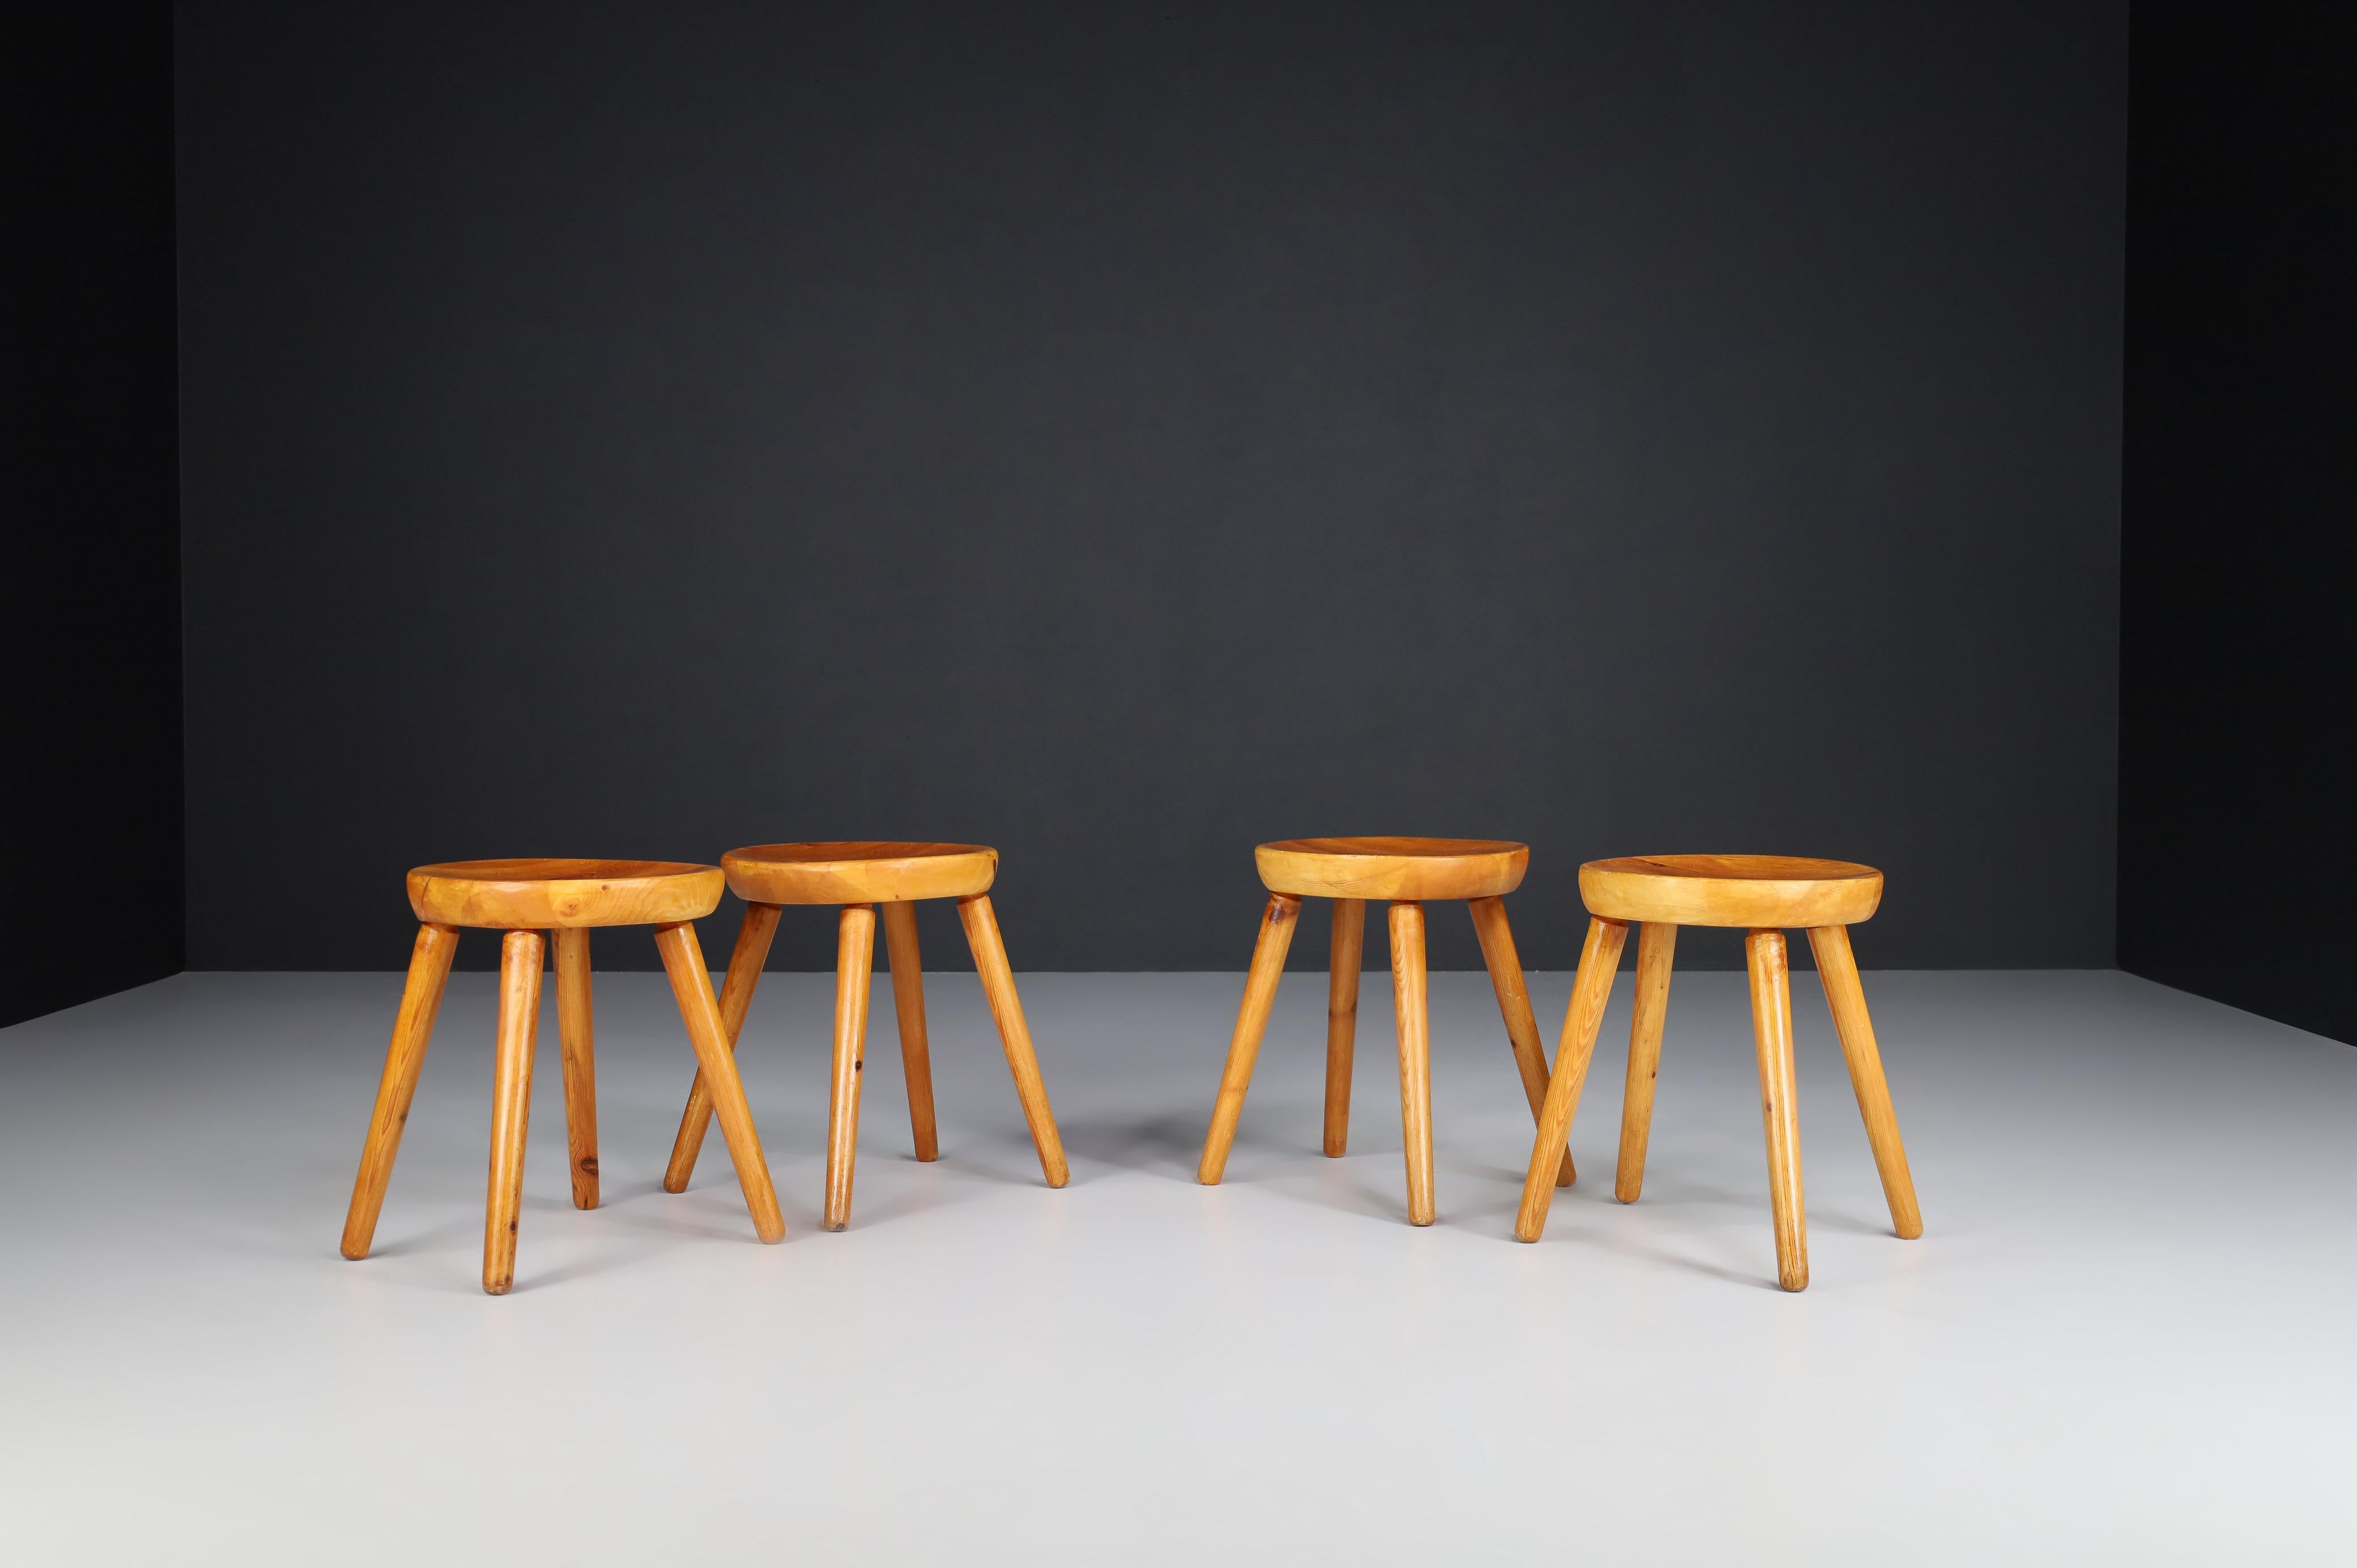 Pinewood French Stools in the Style of Charlotte Perriand, France, 1950s For Sale 2